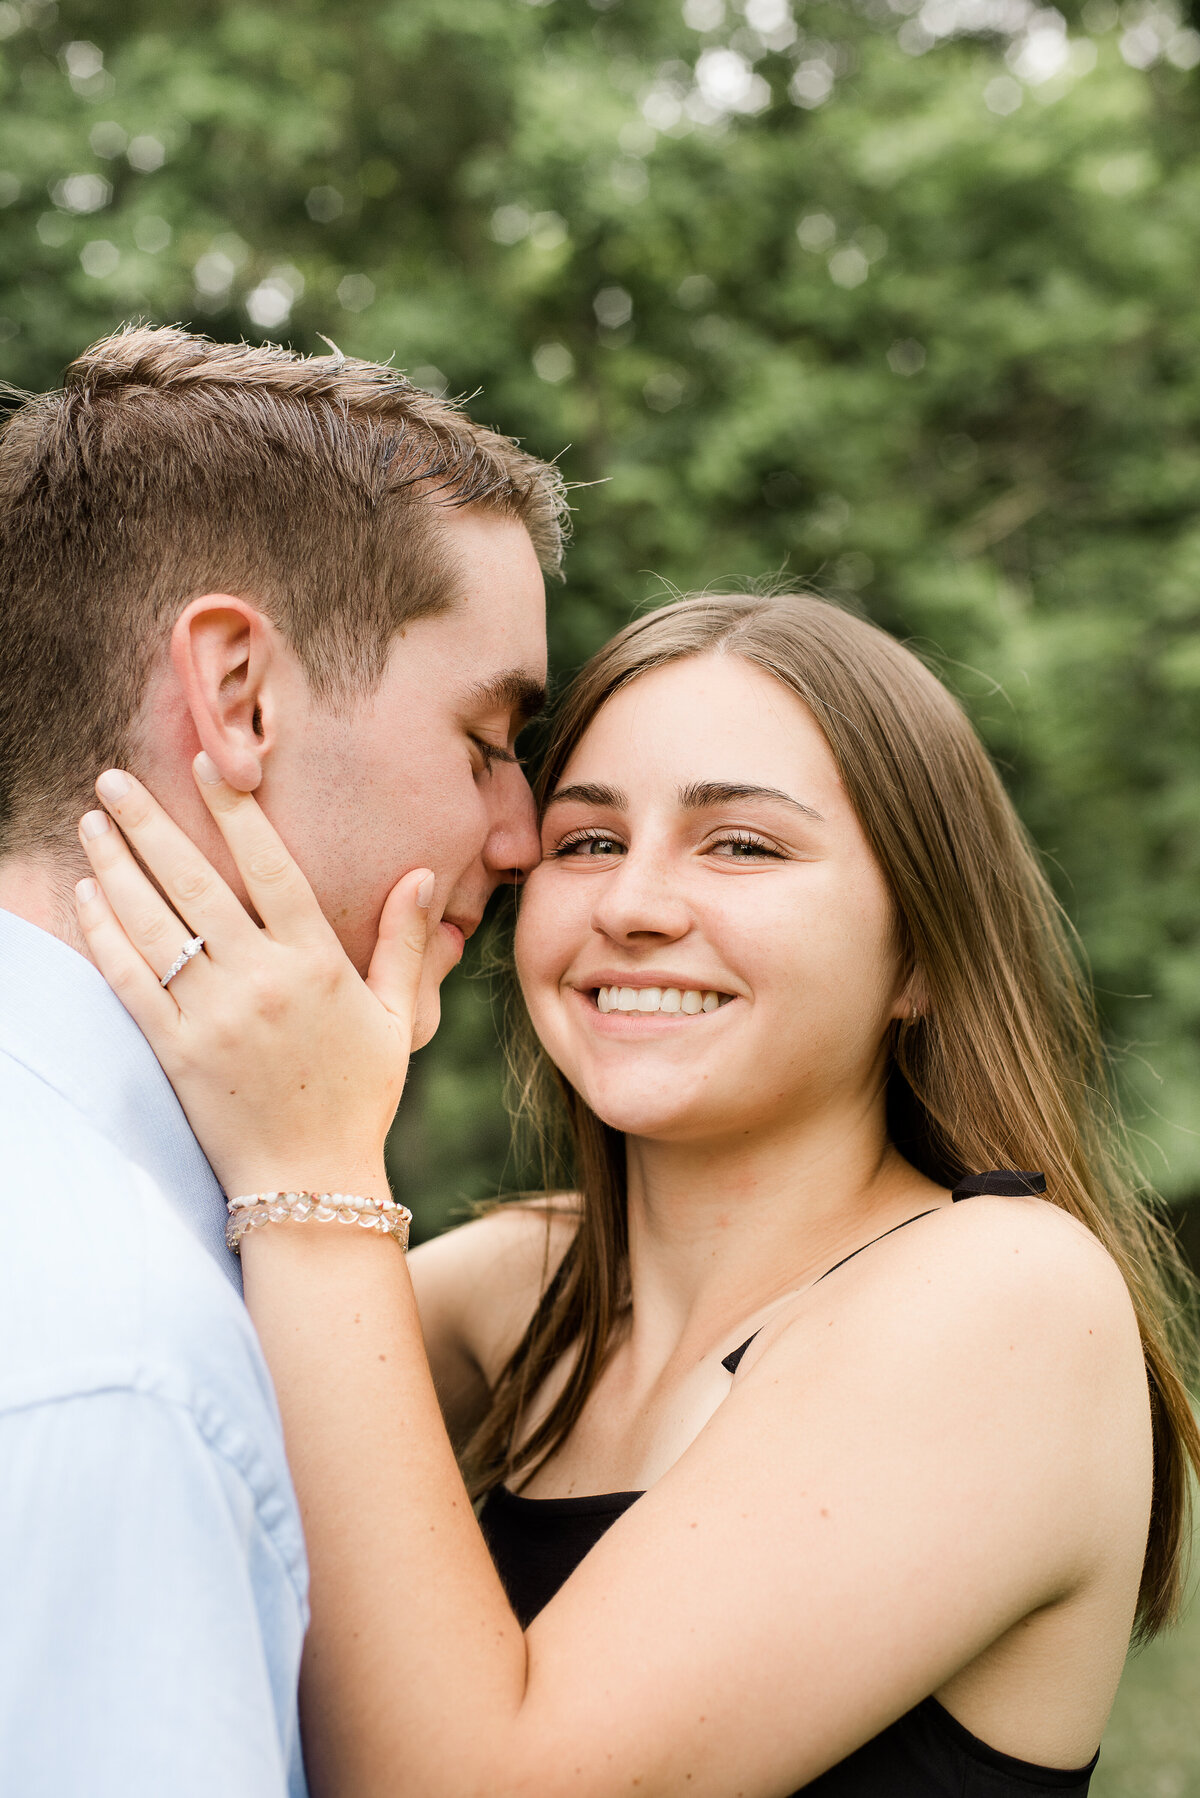 Surprise Proposal at  Park by Michelle Lynn Photography